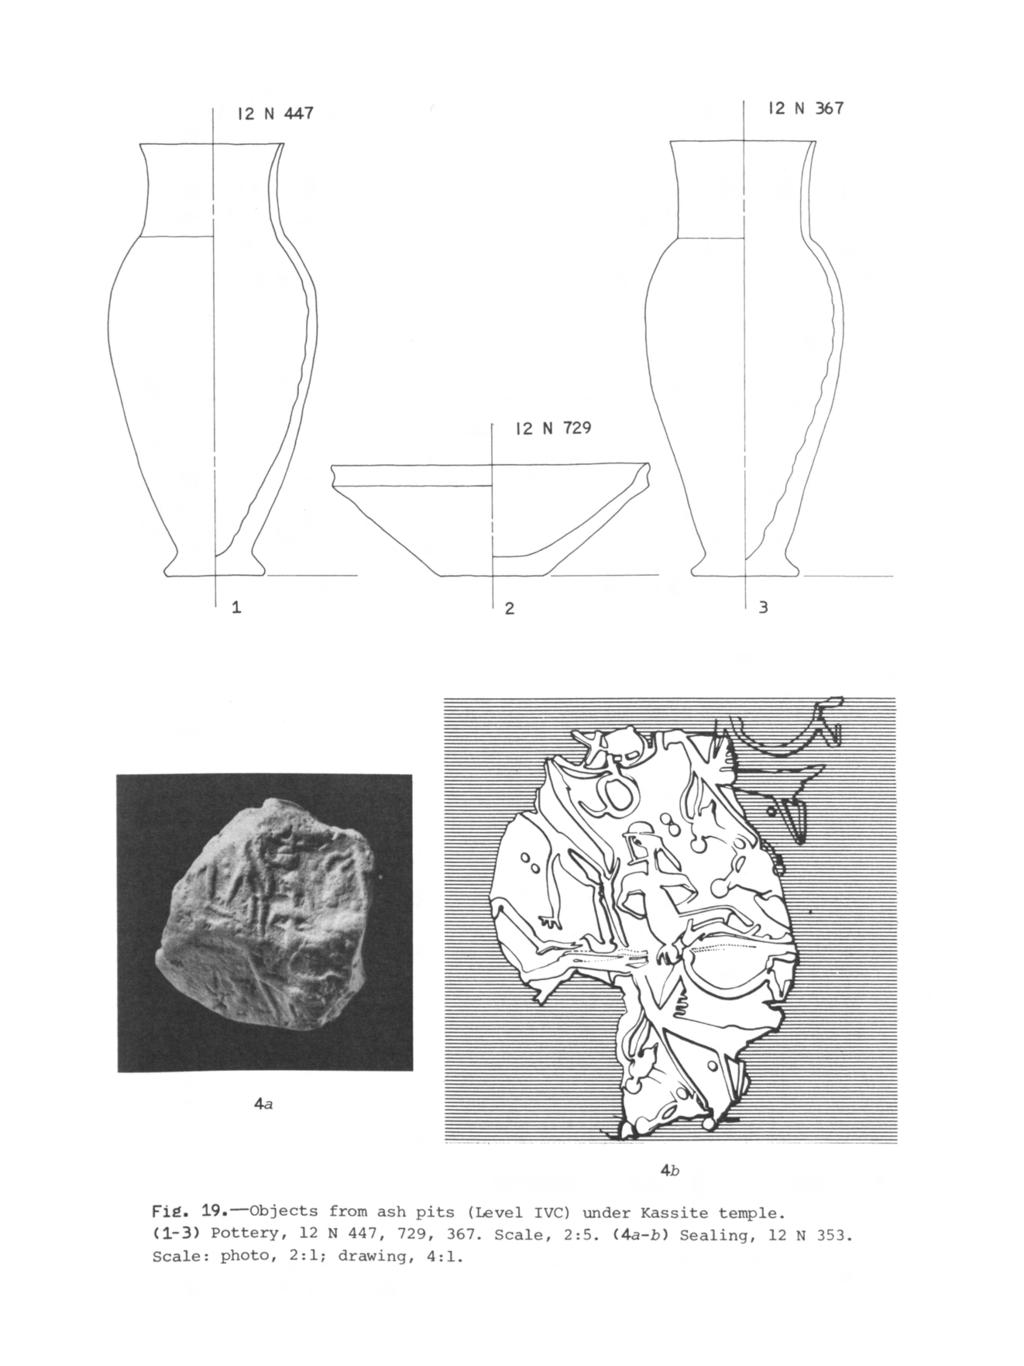 Fig. 19.-Objects from ash pits (Level IVC) under Kassite temple.